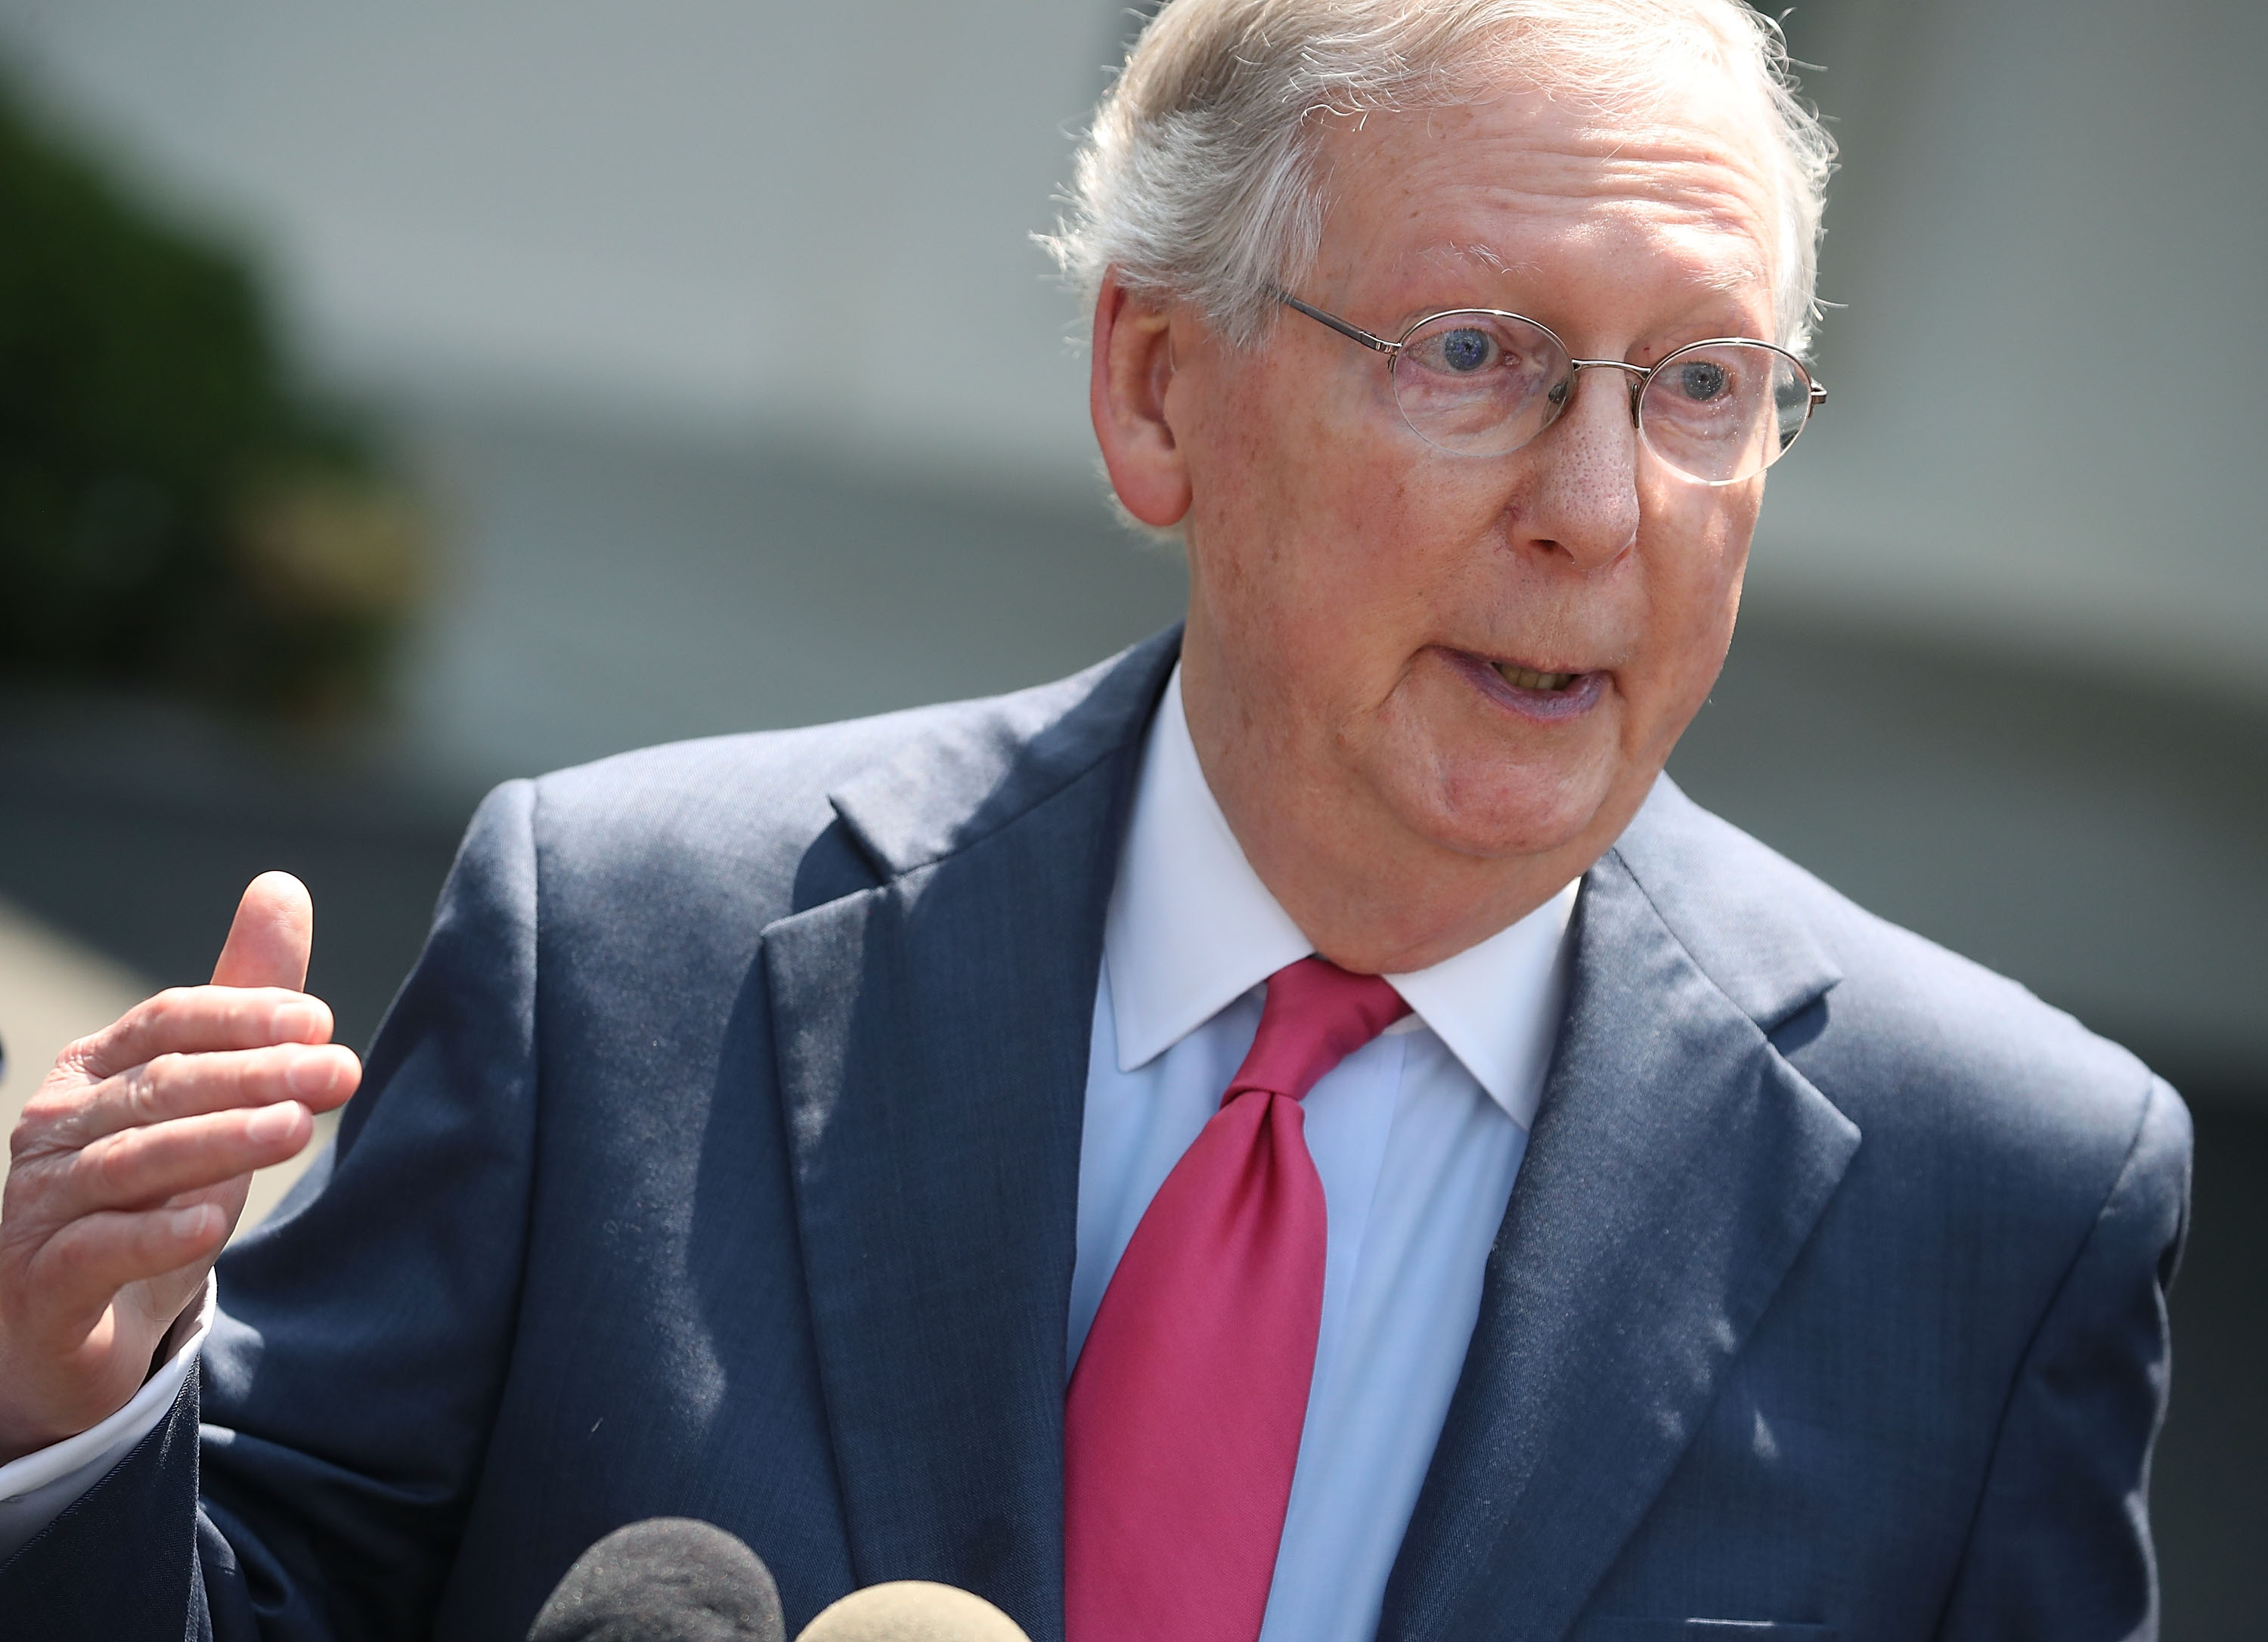 Senate Majority Leader Mitch McConnell (R-KY) speaks to the media July 19, 2017 at the White House in Washington, D.C. (Mark Wilson&mdash;Getty Images)